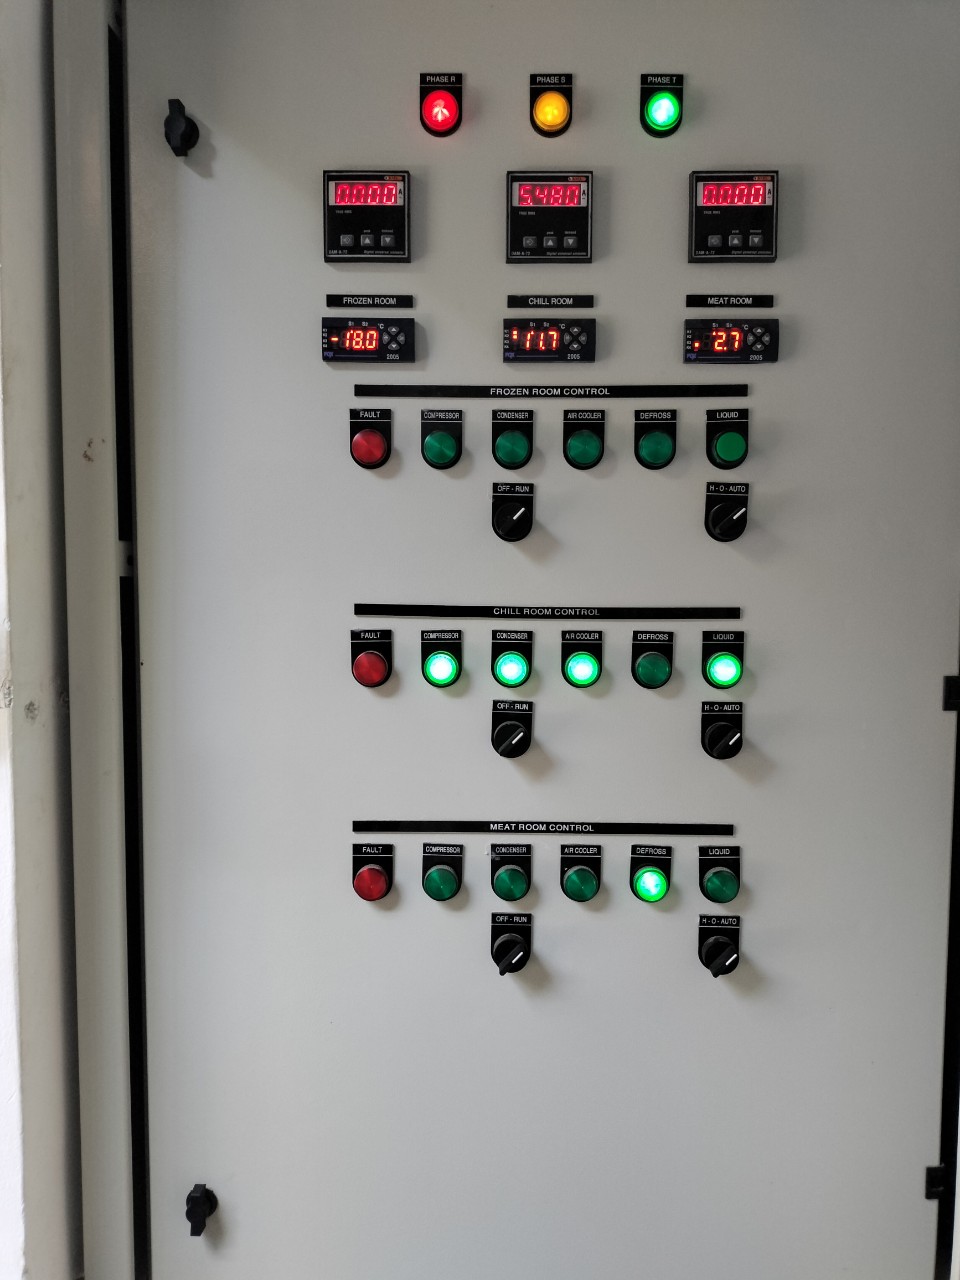 Power and control panel for cold room